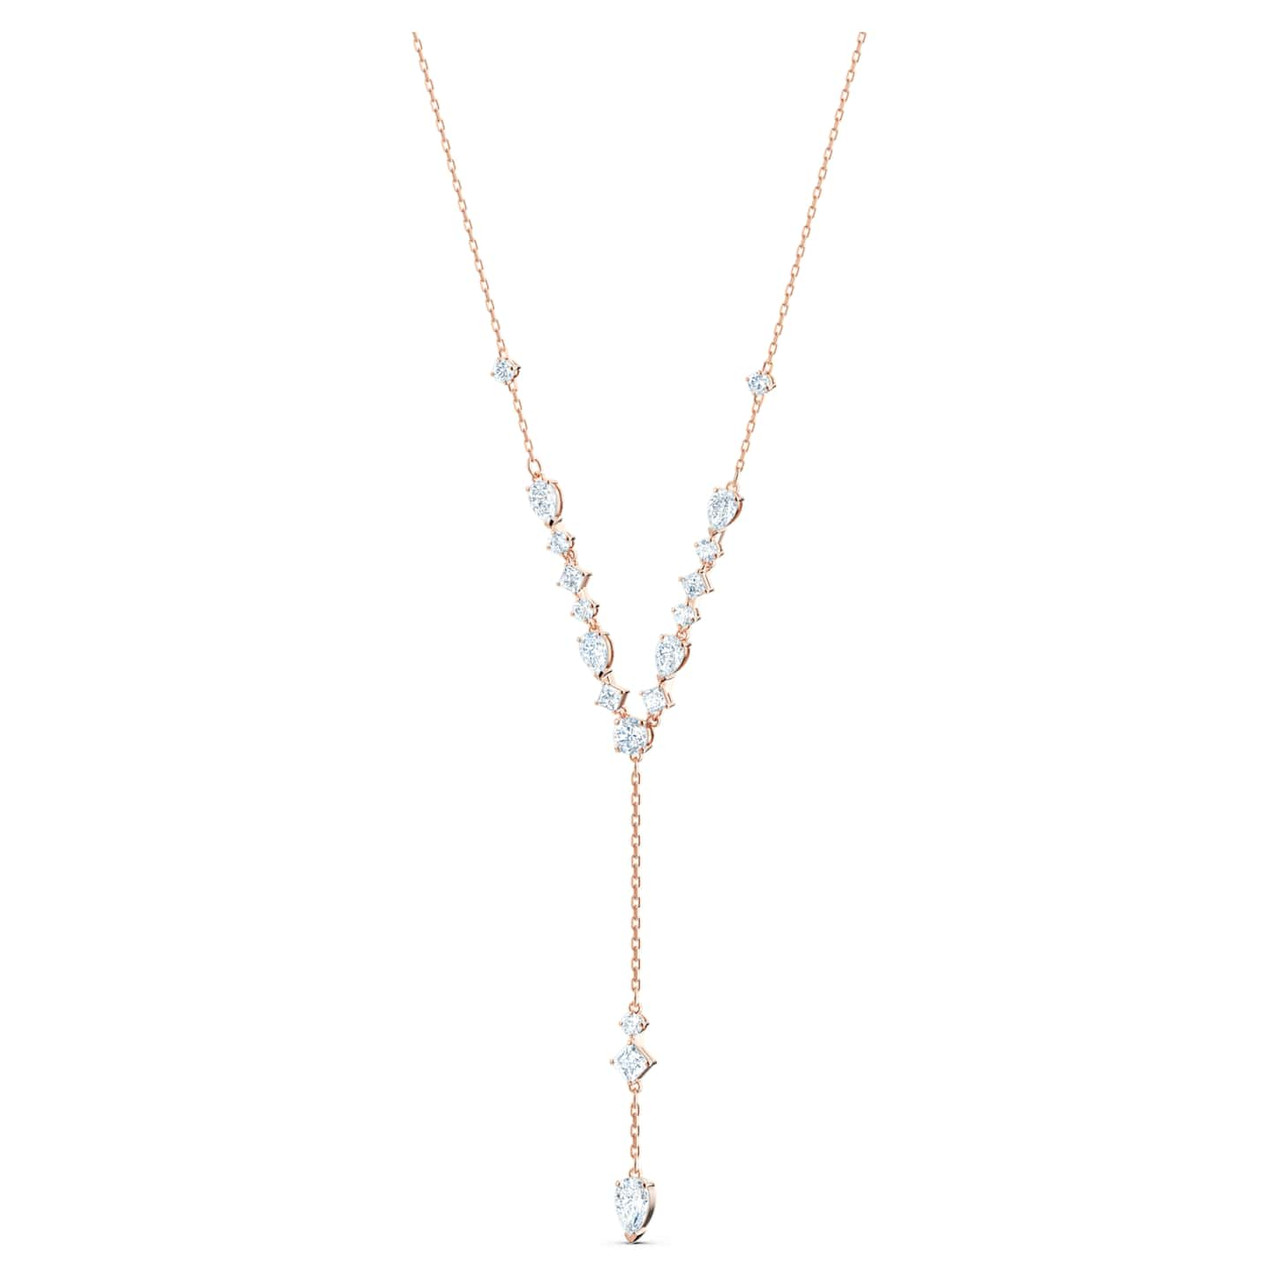 Crystalline Azuria Rose Gold Jewelry: Swarovski Crystal Simulated White Pearls Necklace and Jewelry Set Set for Women - Wedding